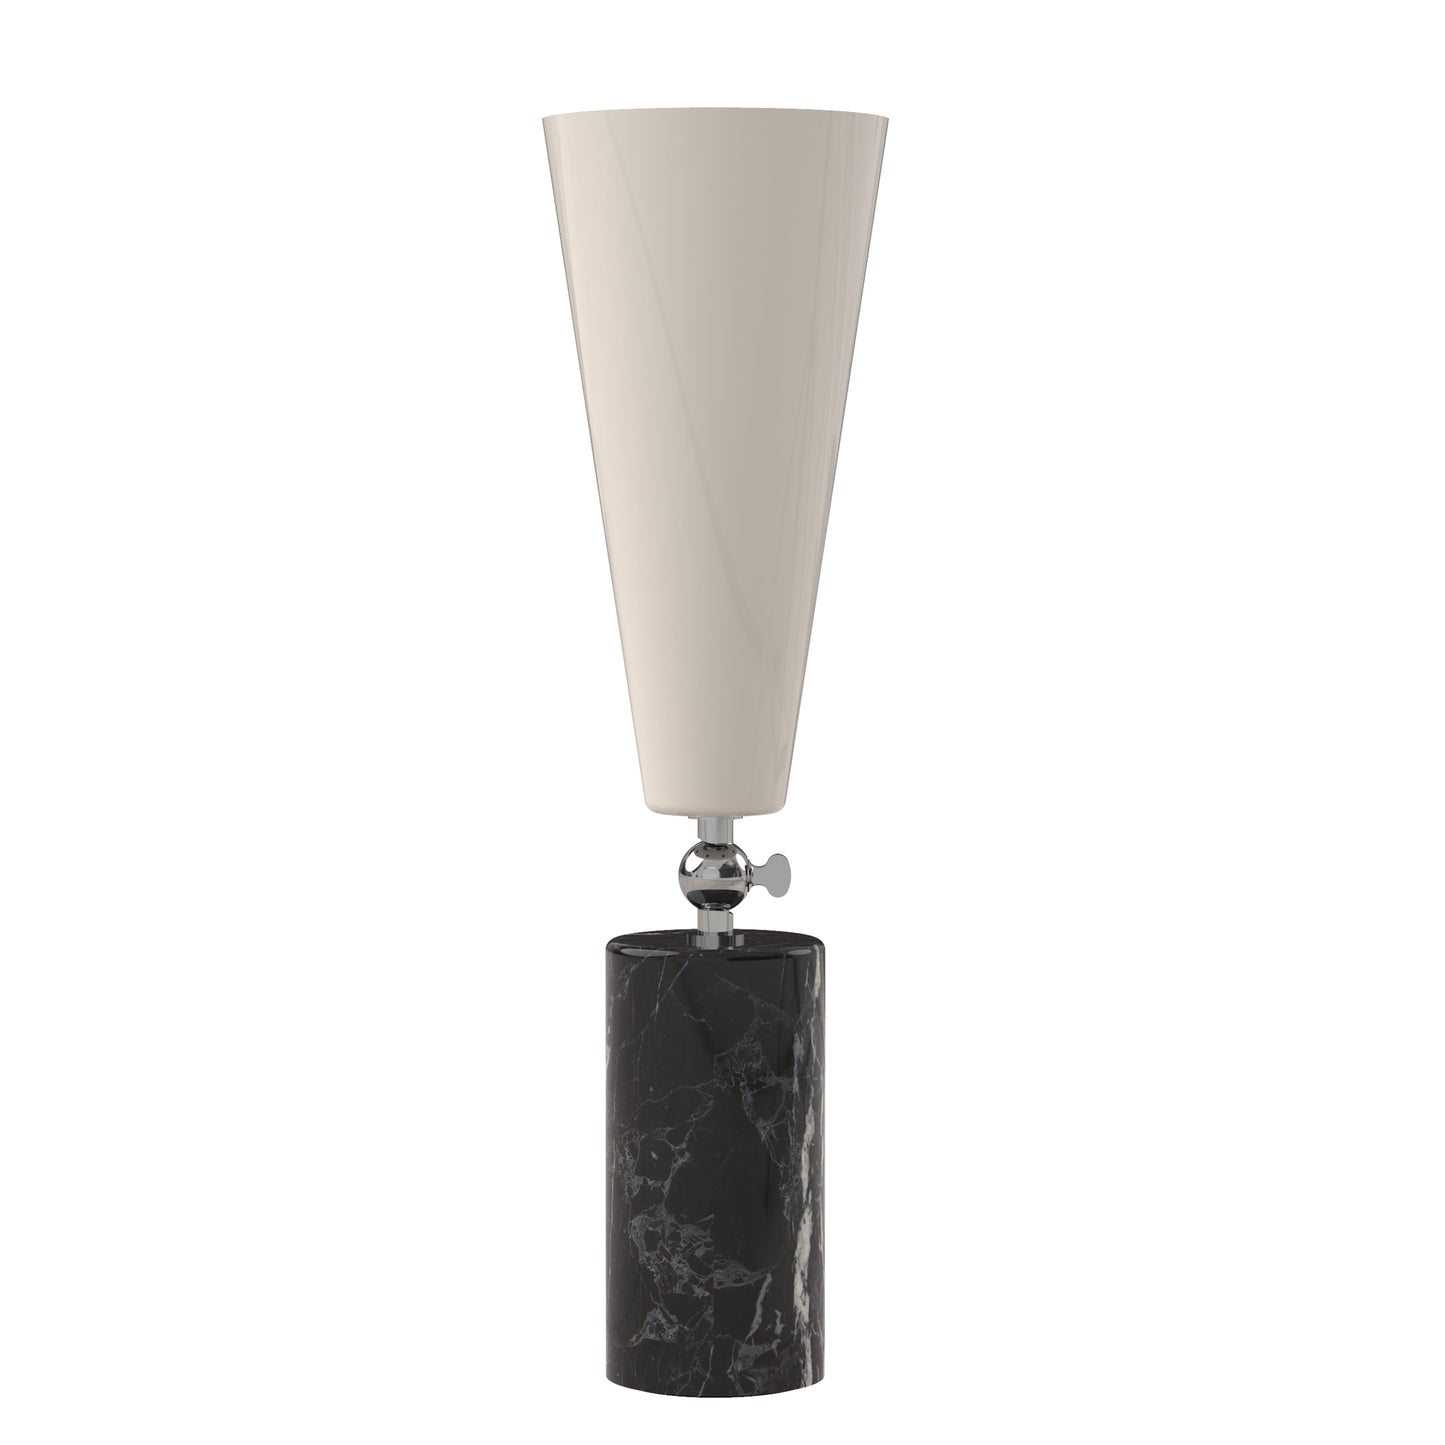 Vox Table Lamp